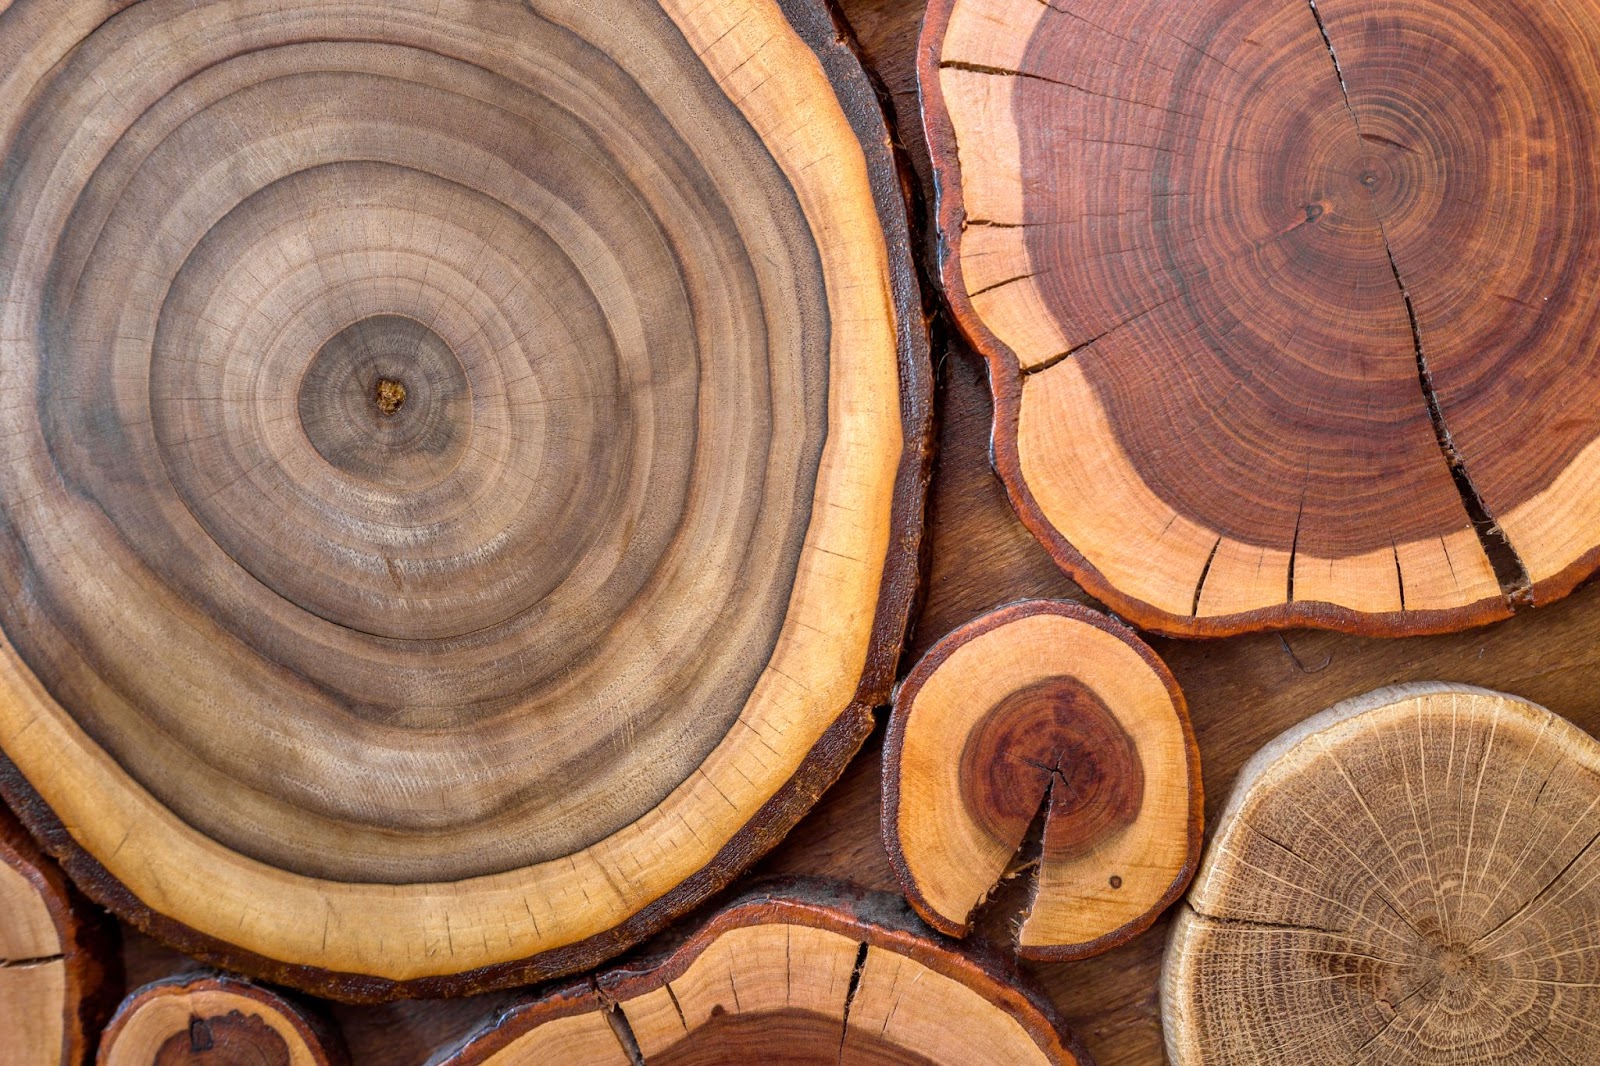 The brown and yellow rounded crackled stumps with annual rings in different sizes and forms.